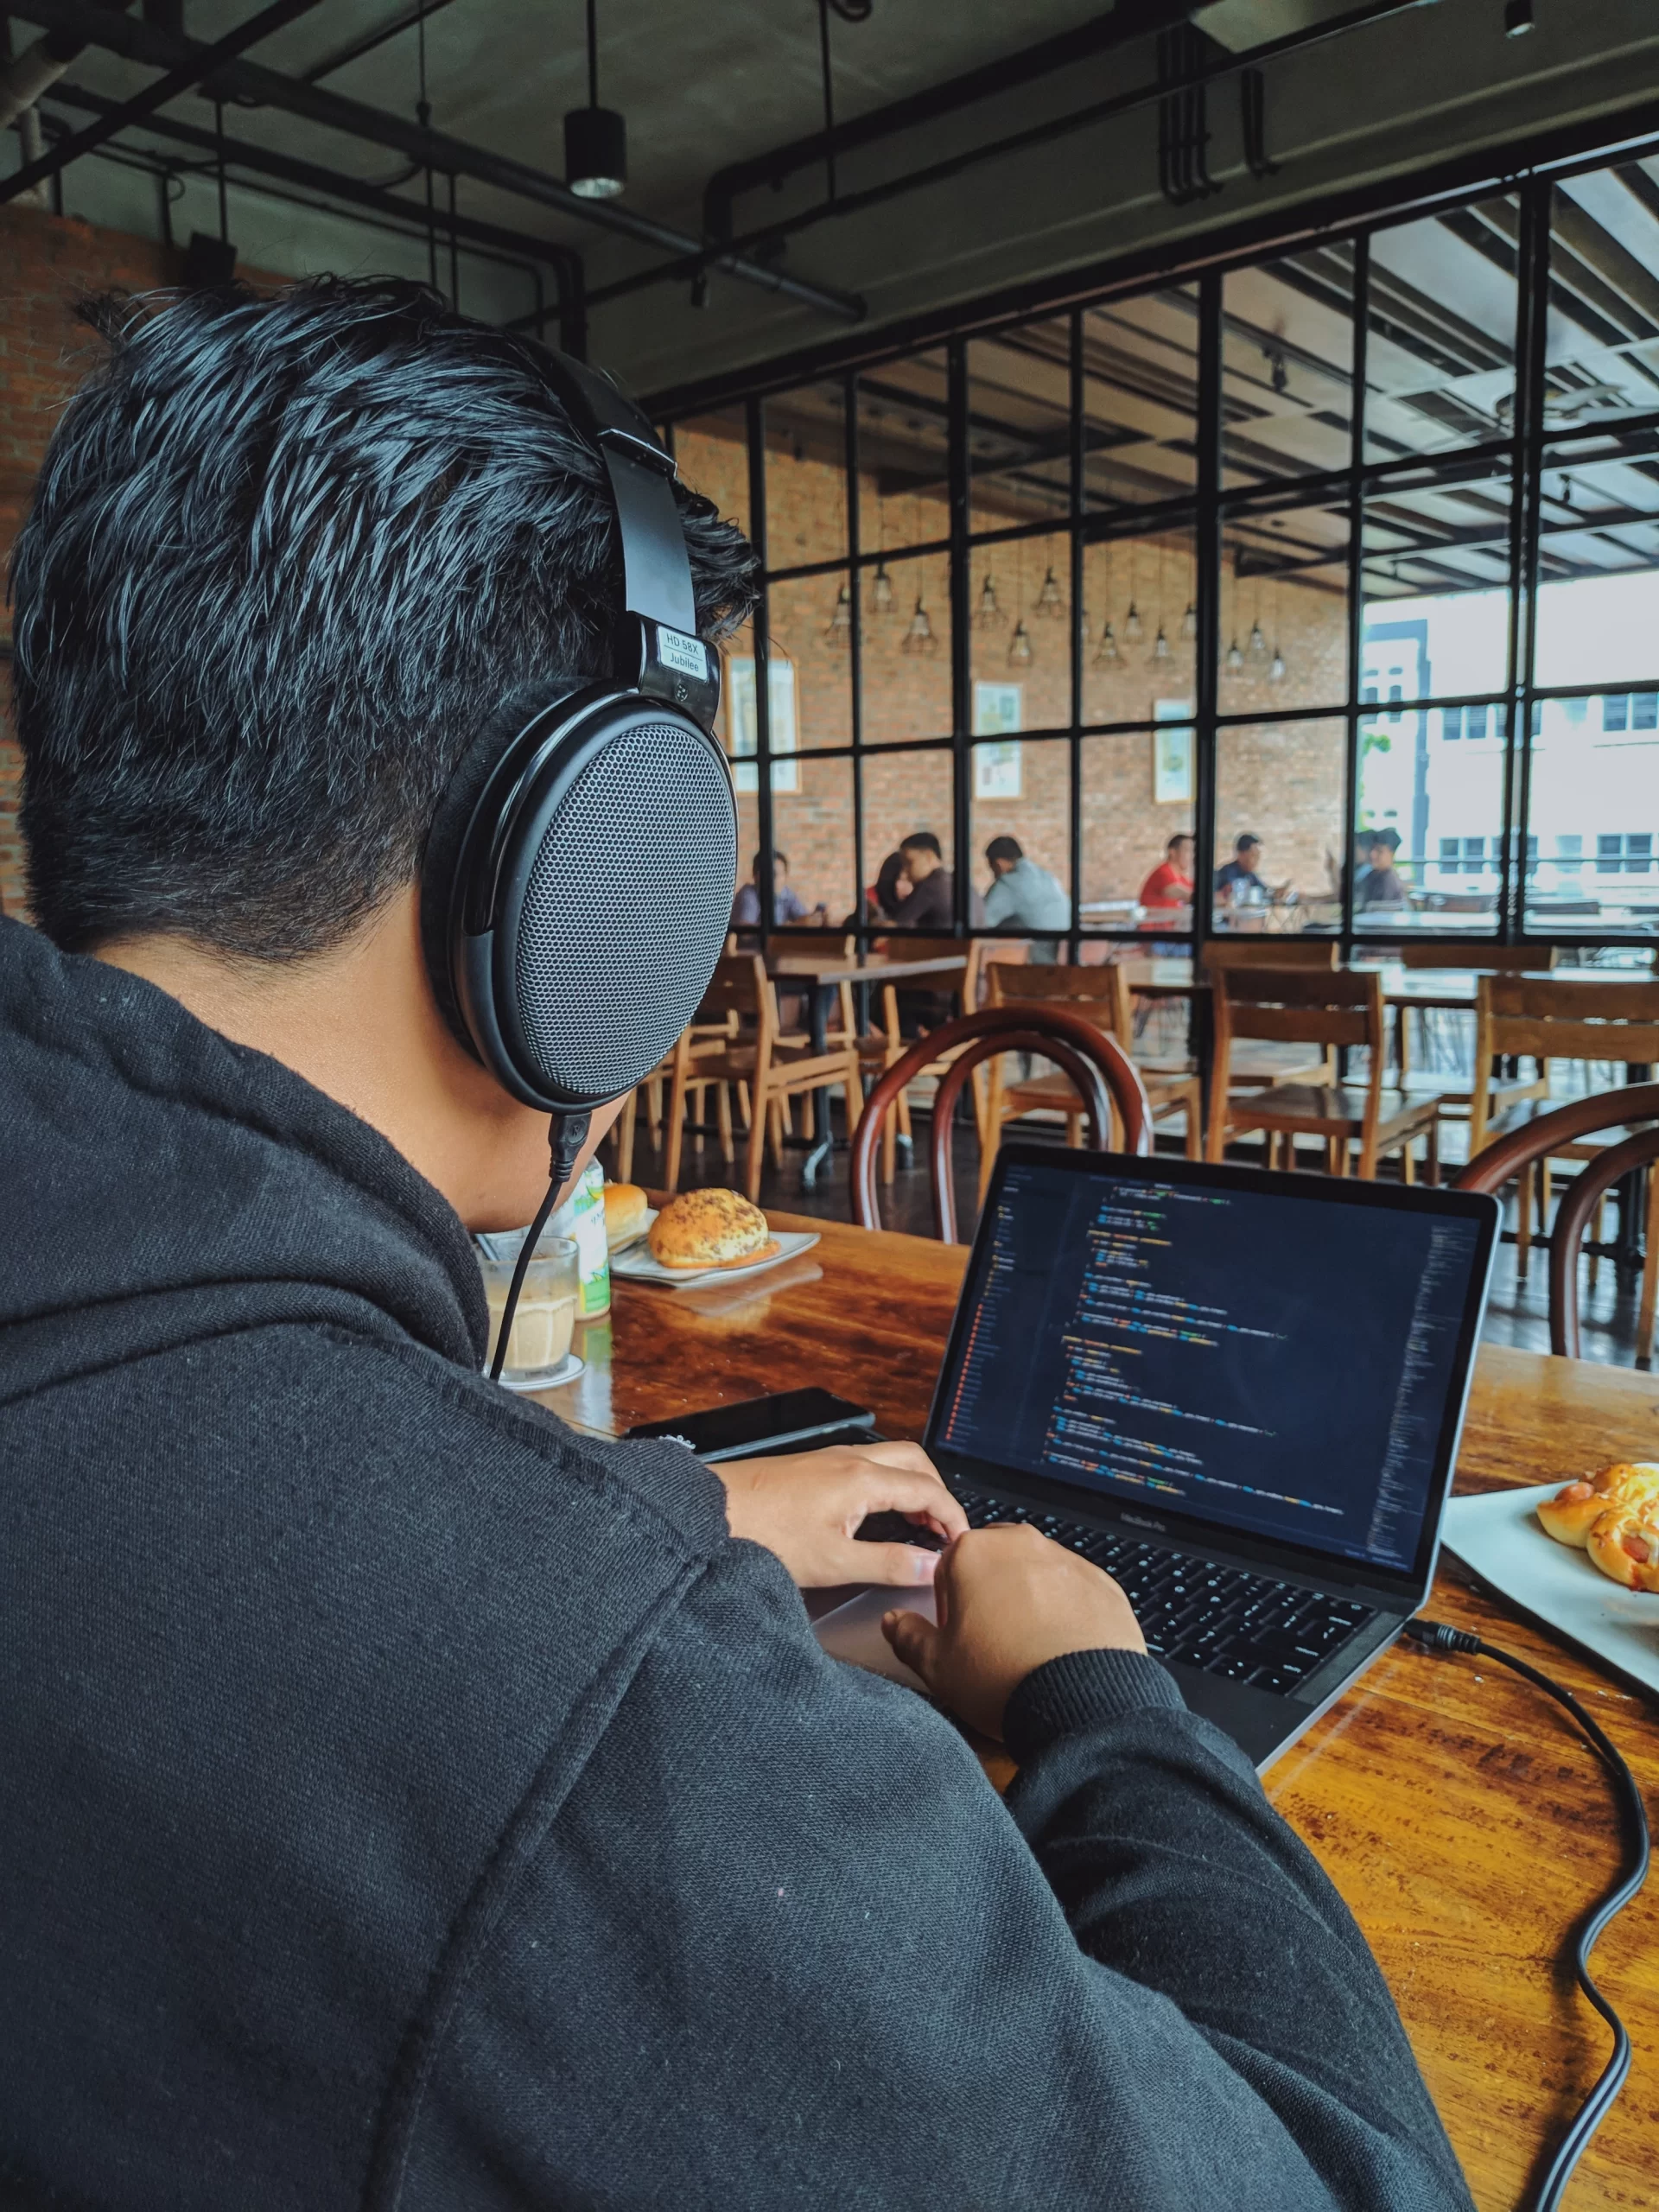 Published on March 2, 2019<br />
asus, ASUS_X00QD<br />
Free to use under the Unsplash License<br />
This is me while working from a cafe, wearing the Massdrop x Sennheiser HD 58X